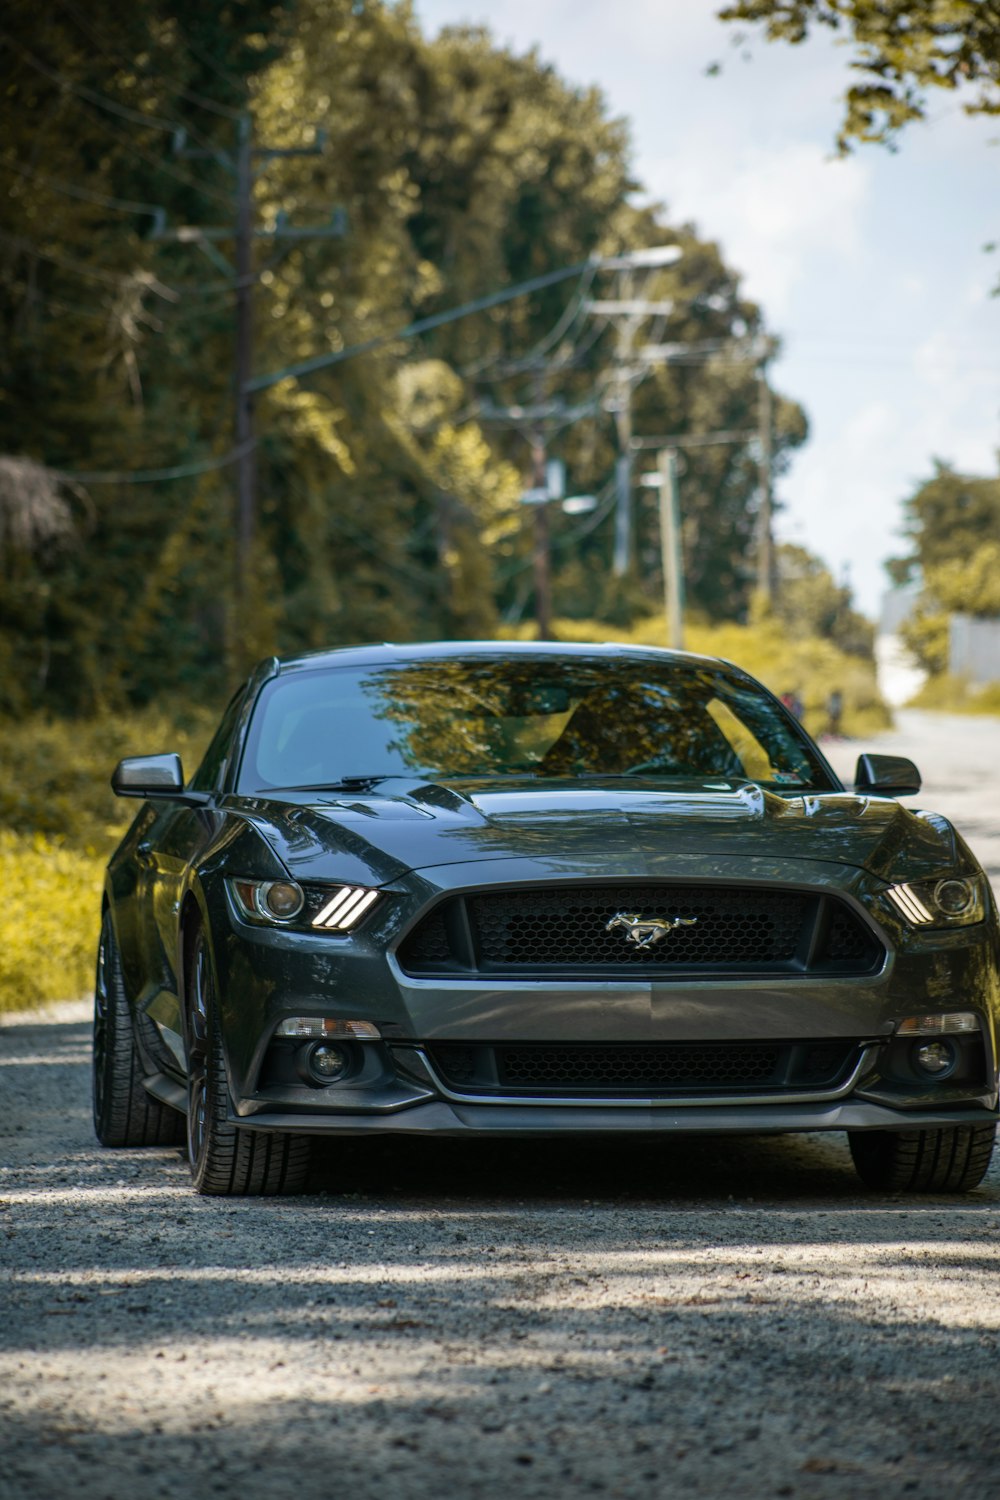 Mustang Gt Pictures | Download Free Images On Unsplash